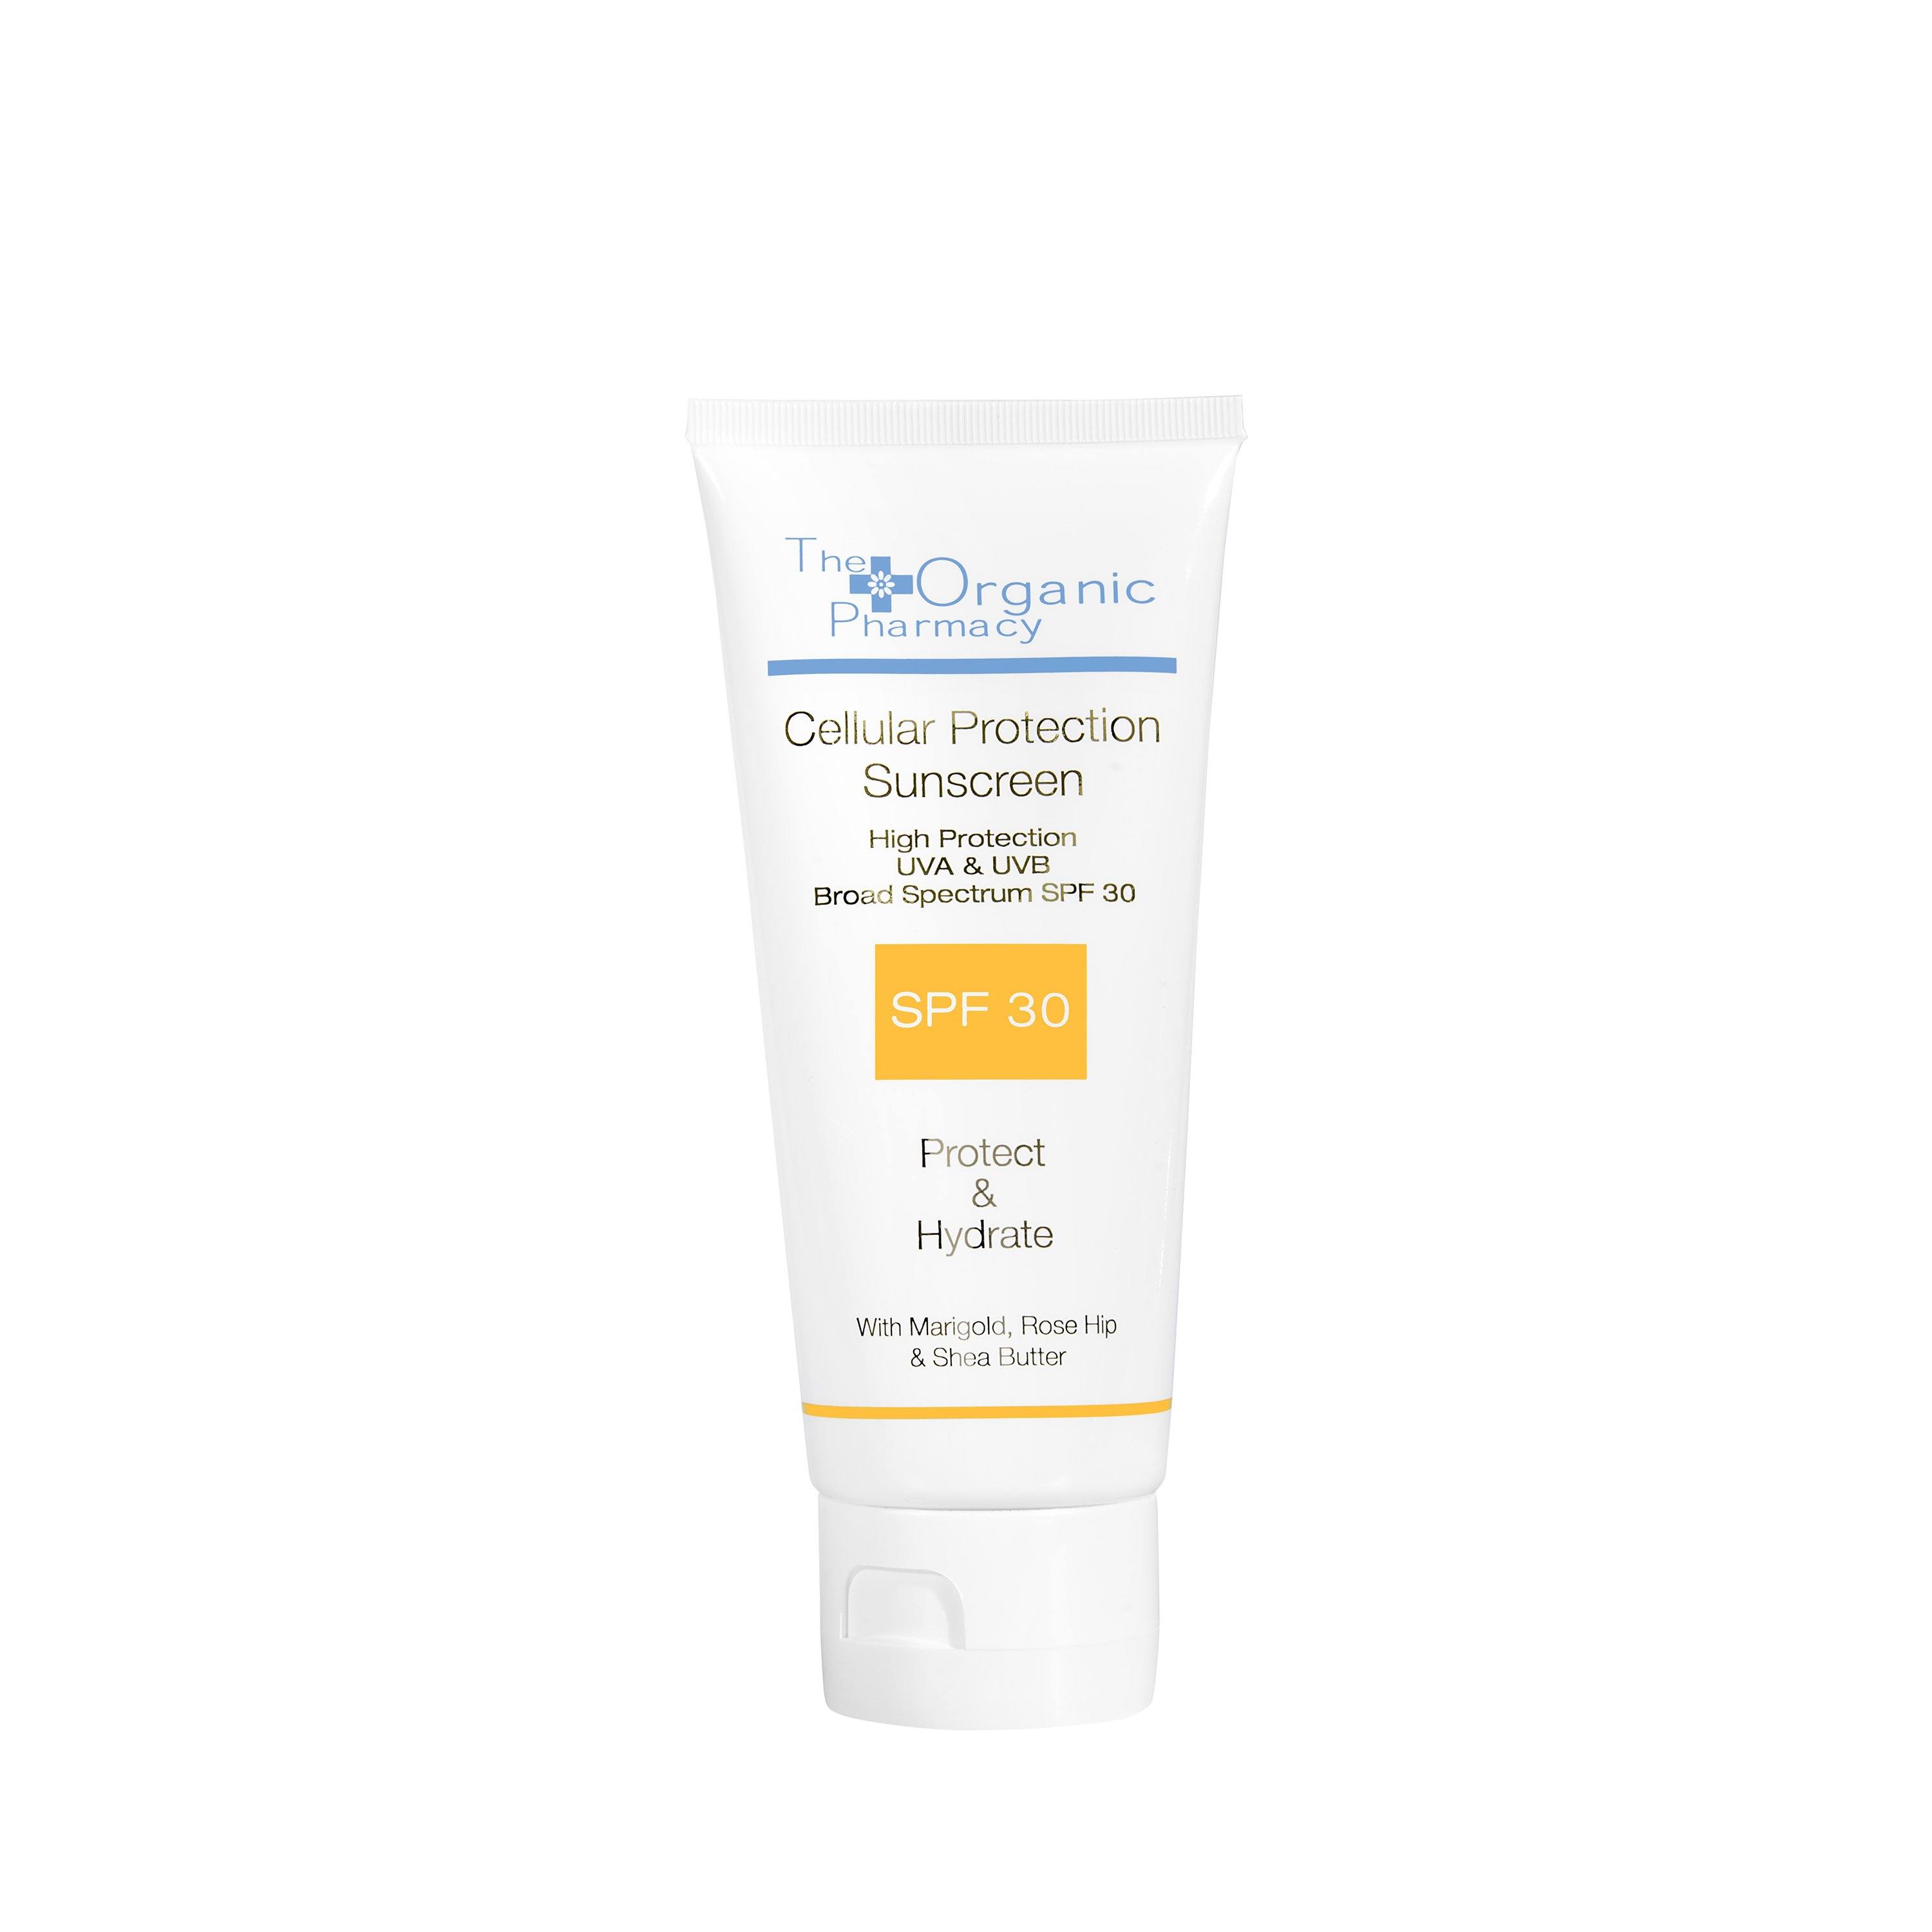 The Organic Pharmacy - Cellular Protection Sunscreen SPF 30